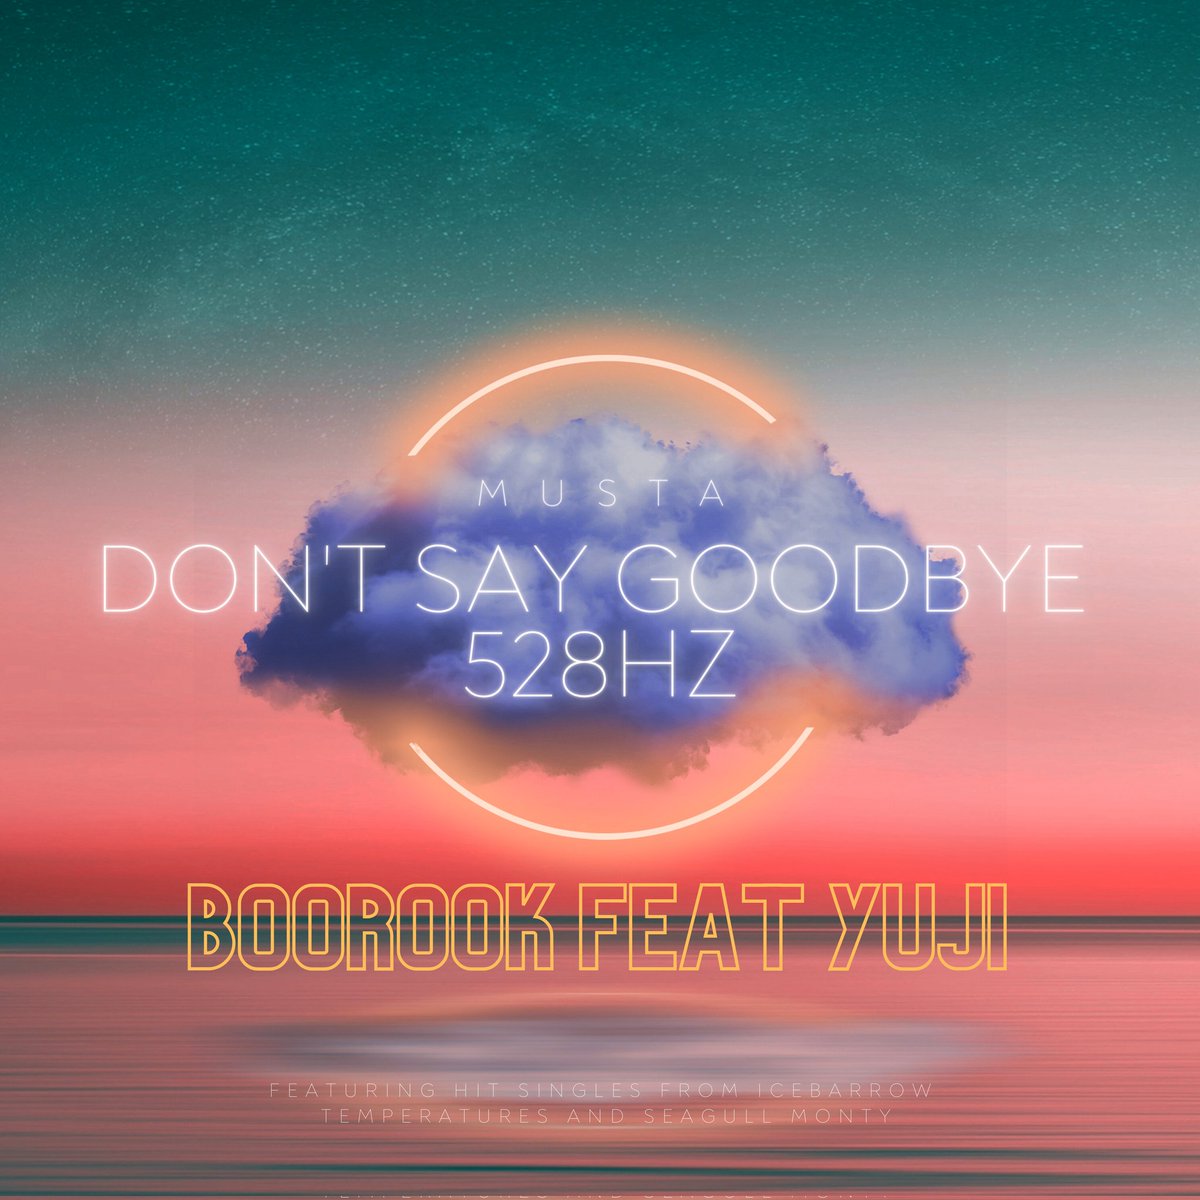 Excited to Announce new Boorook music coming soon Thankyou to All @amuse_io 
Don't Say Goodbye 528hz Feat Yuji
Mixed by Baywood @baywoodmusic
#NewMusic2023 #musicindustrynews
@TrillestEnt @theretweetermag
@Darryl_Sterdan @HipHopWeekly @TheSource @TheHypeMagazine @StarMusicRadio